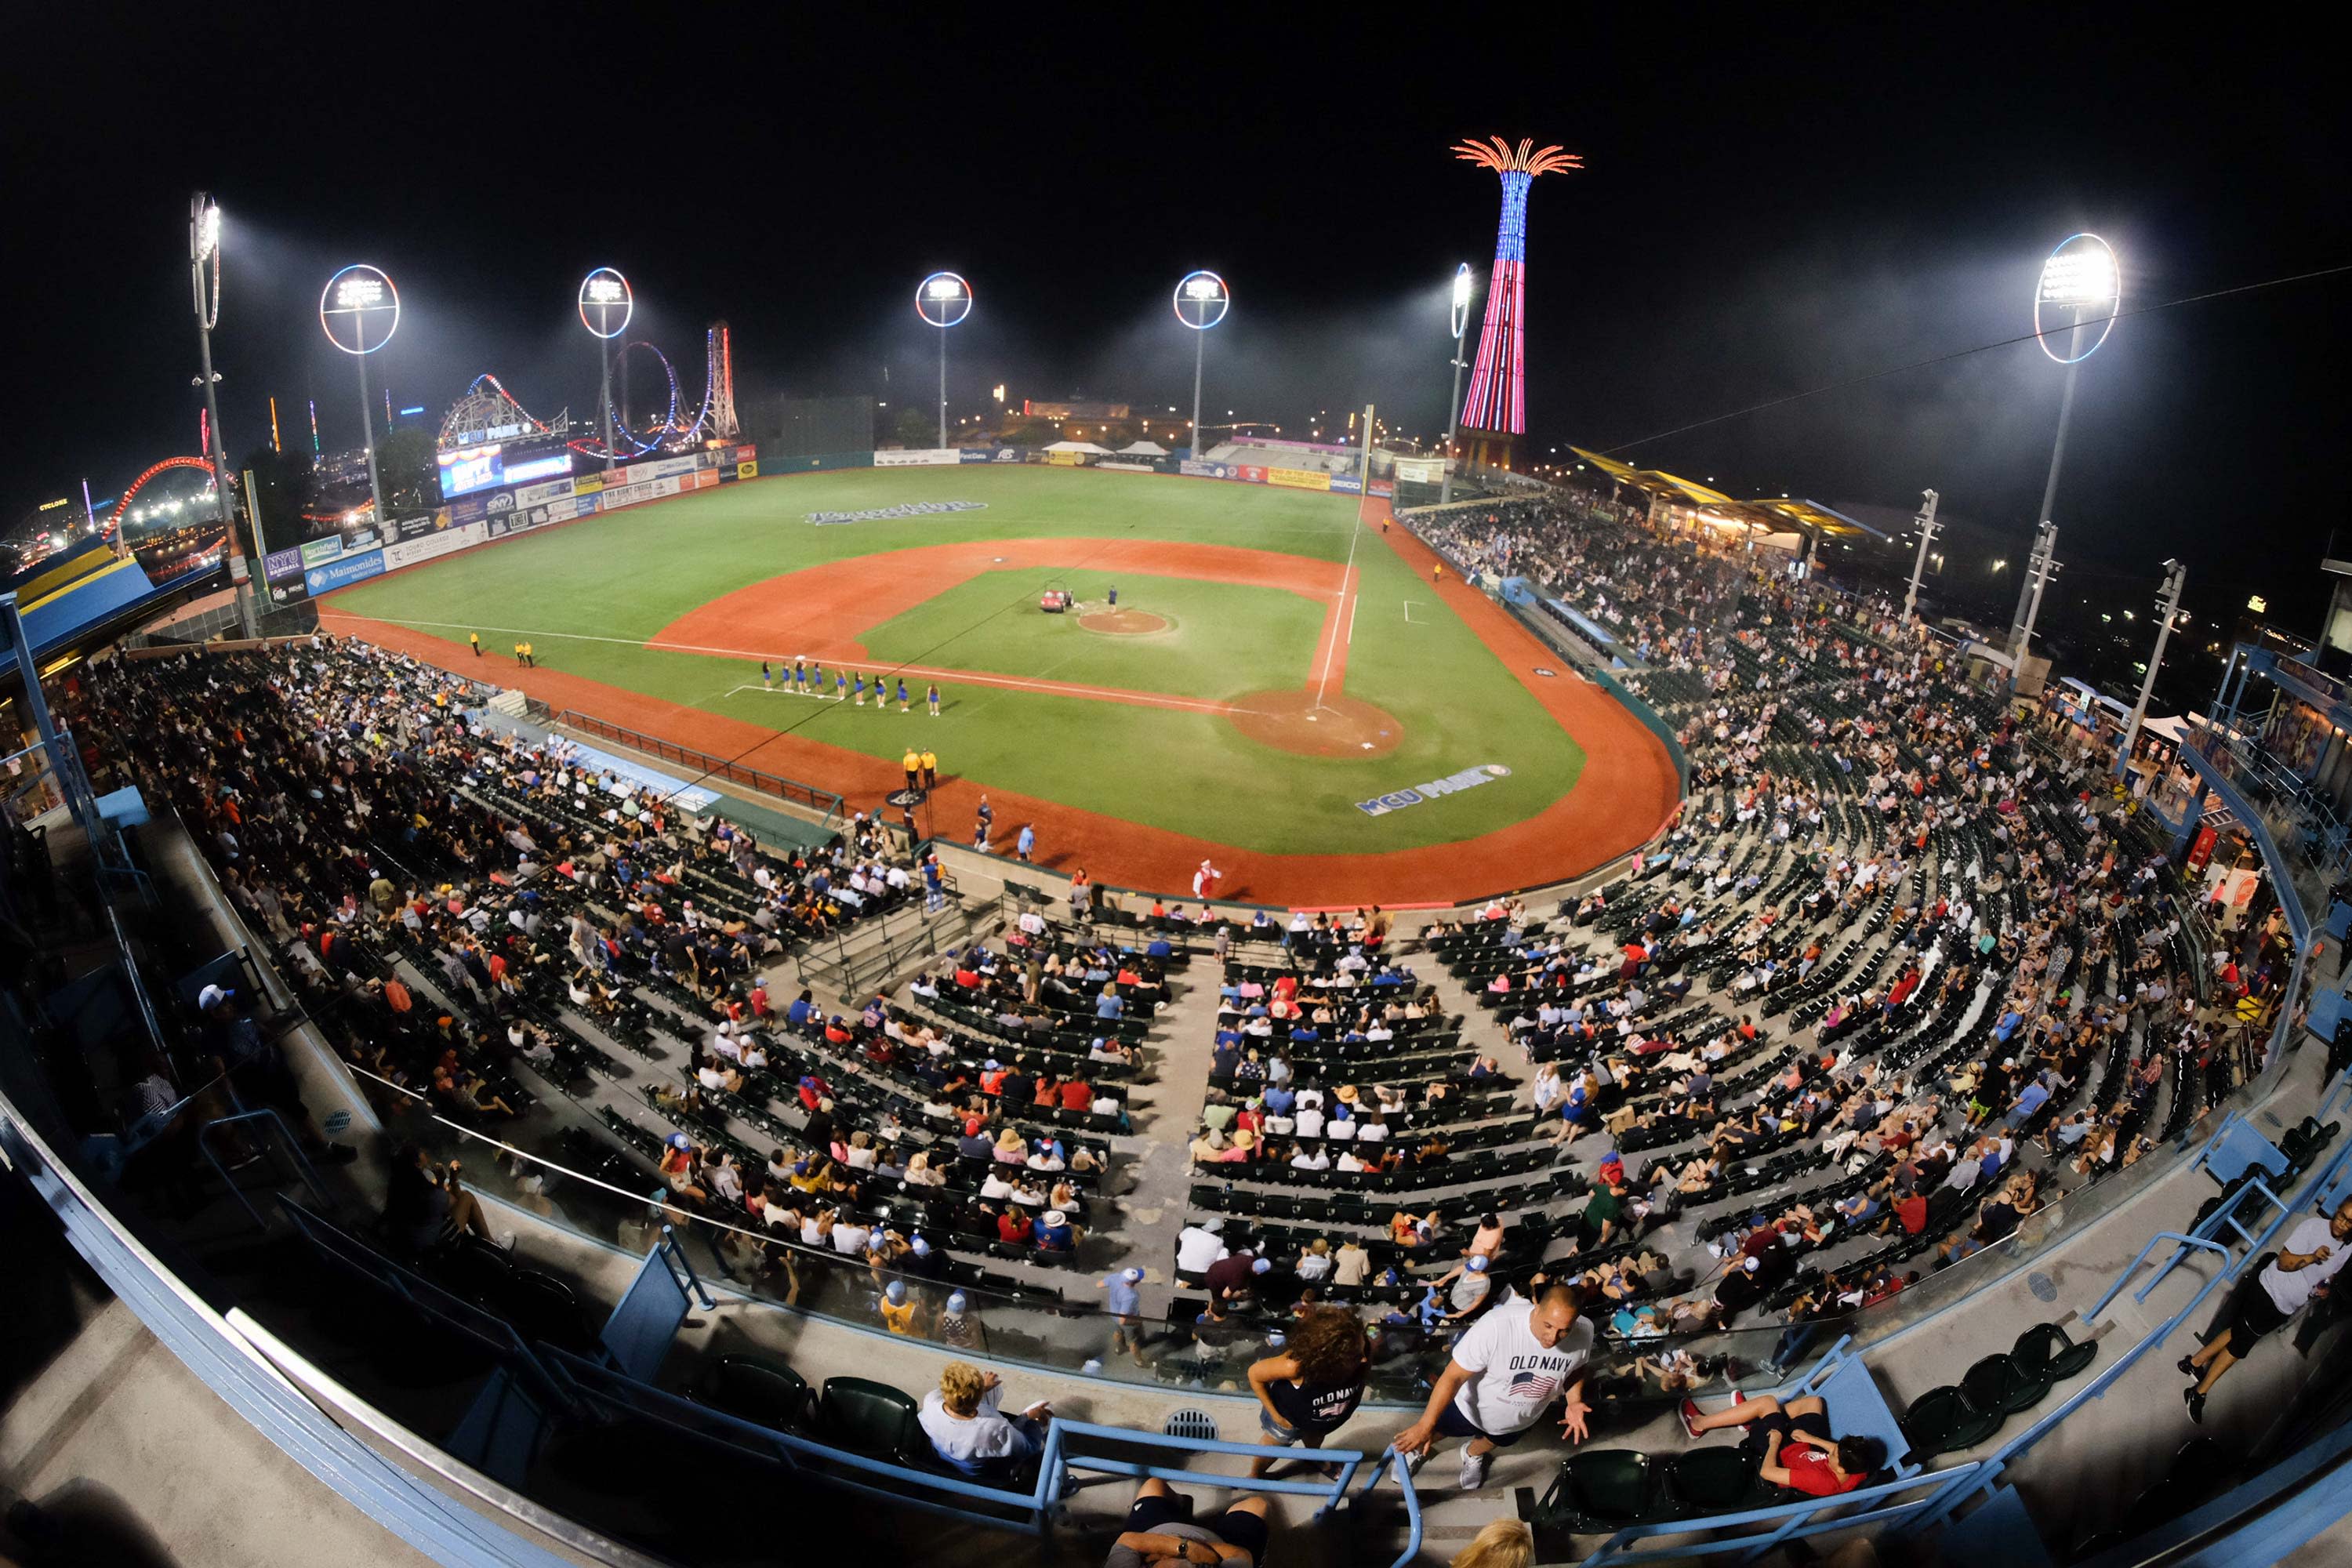 Brooklyn Cyclones night baseball game, view from Luxury Suite